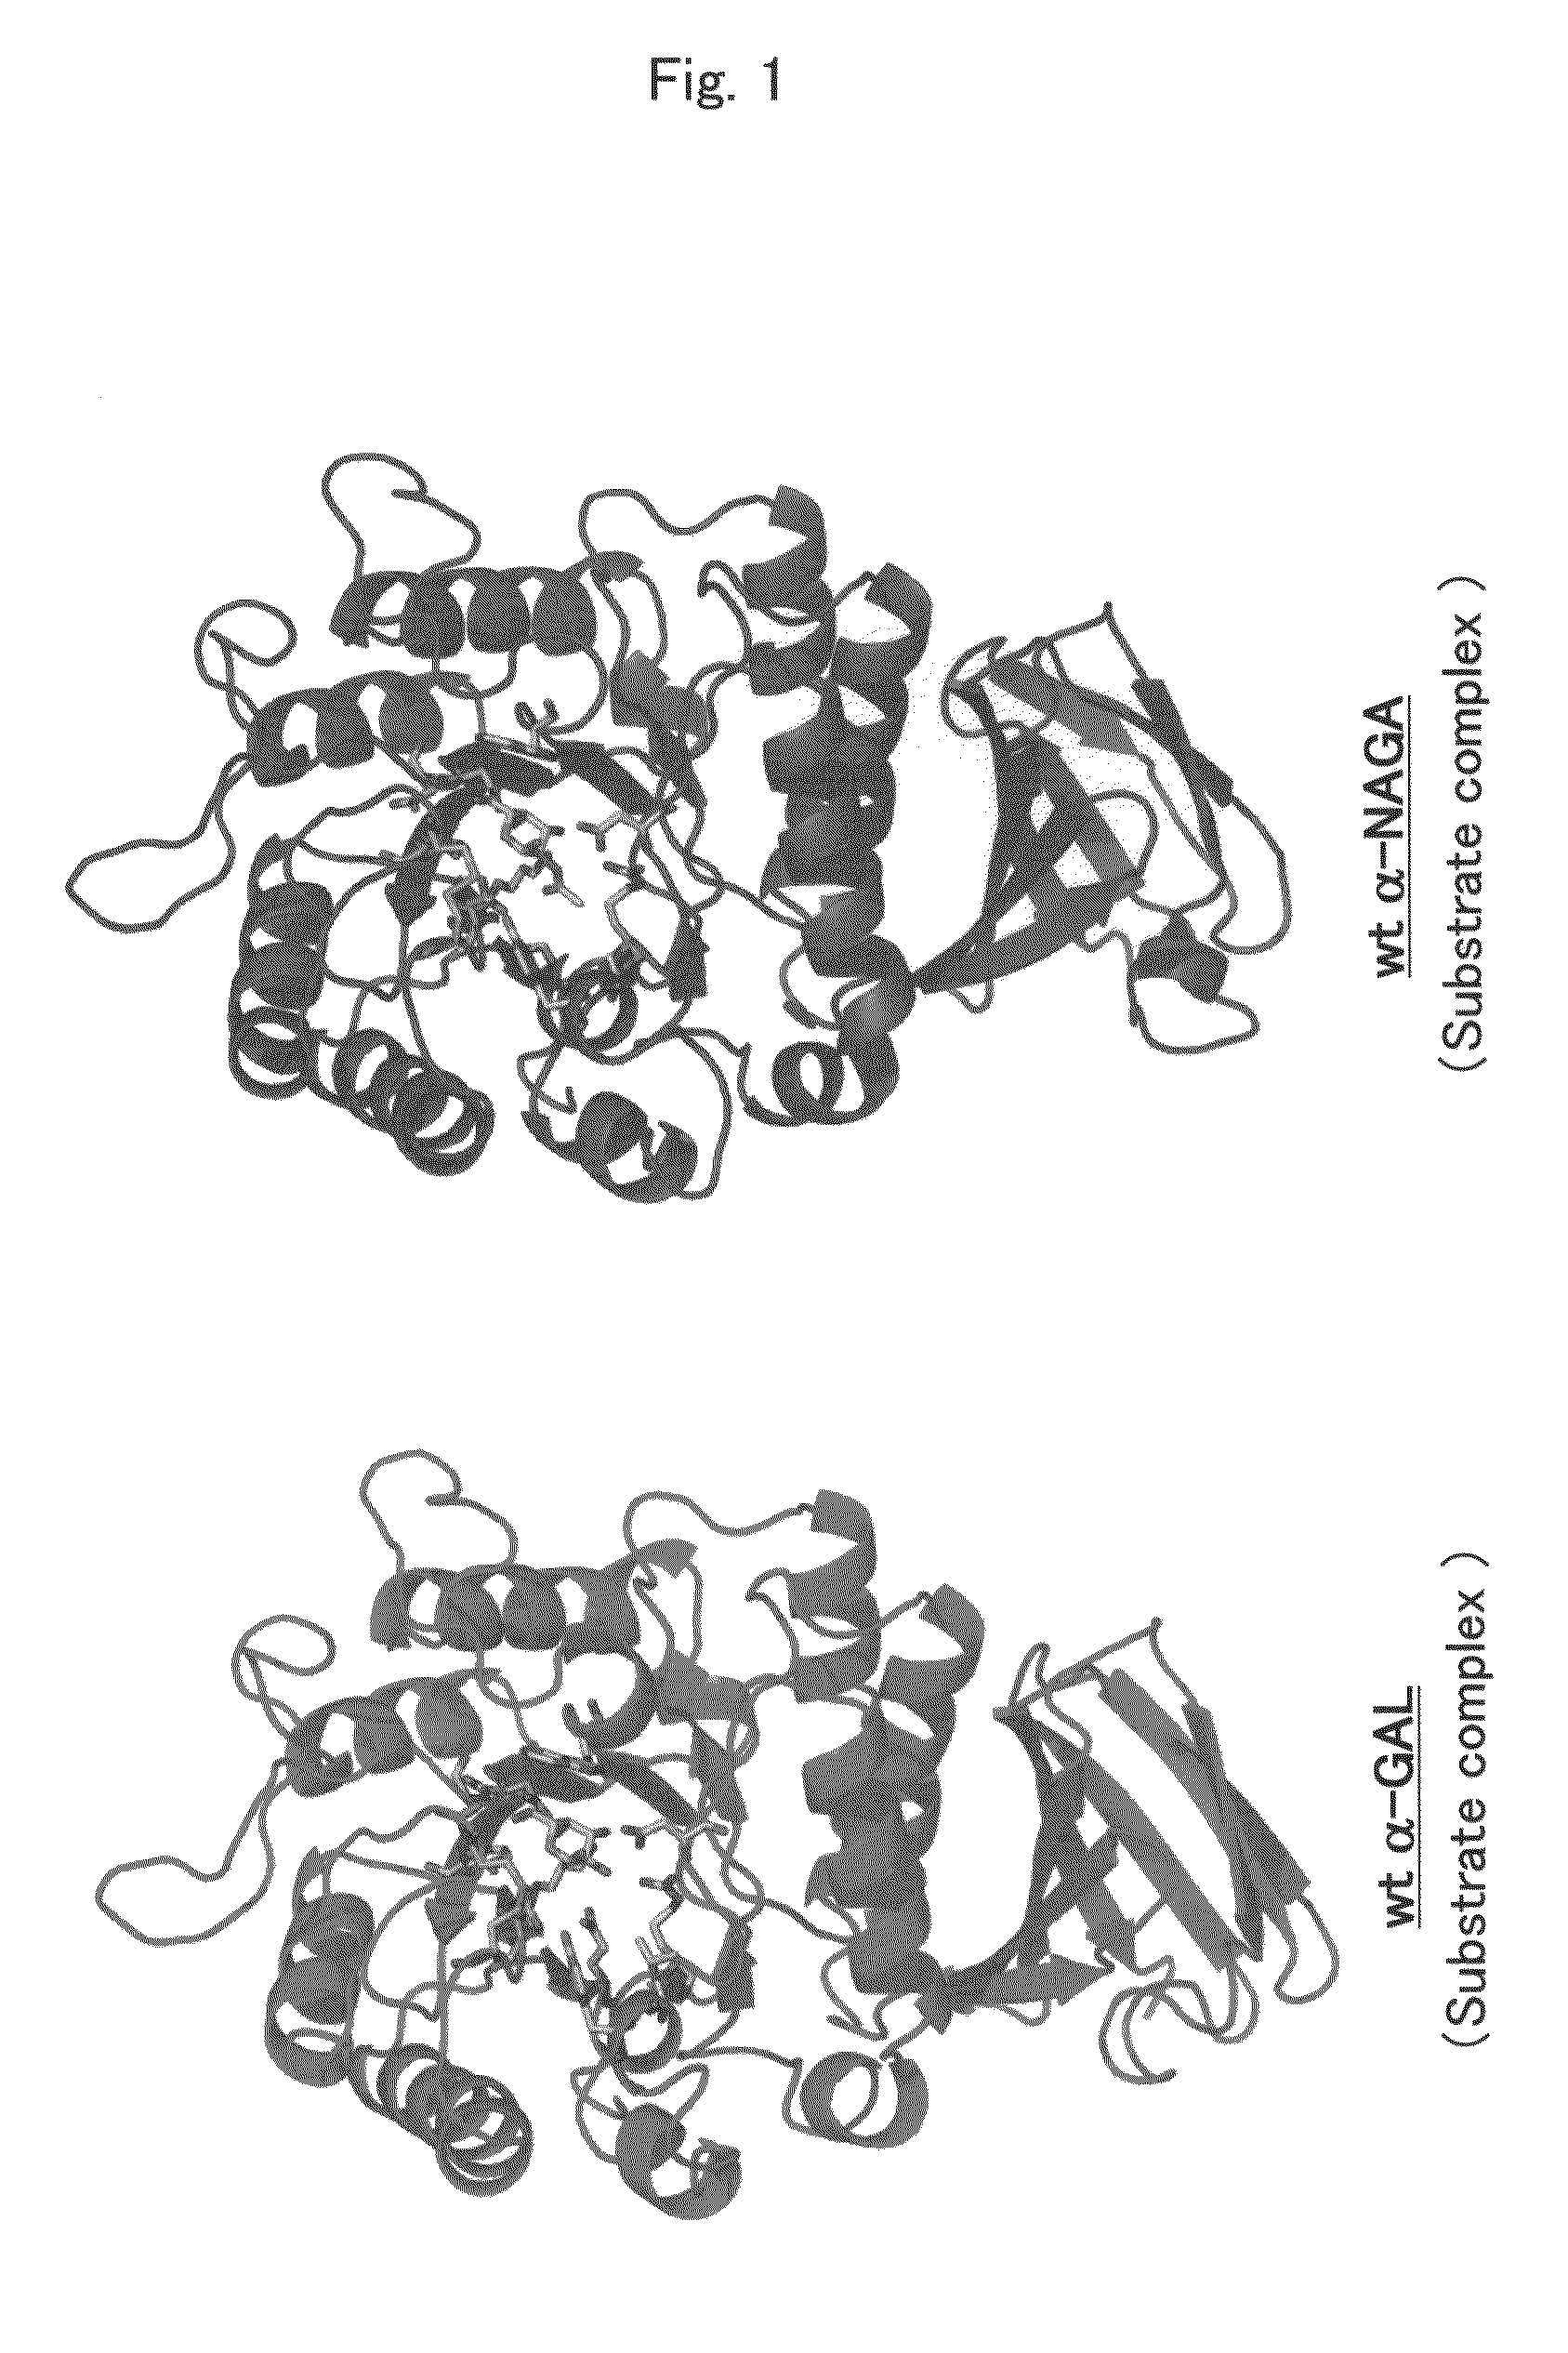 Proteins having acquired A-galactosidase activity